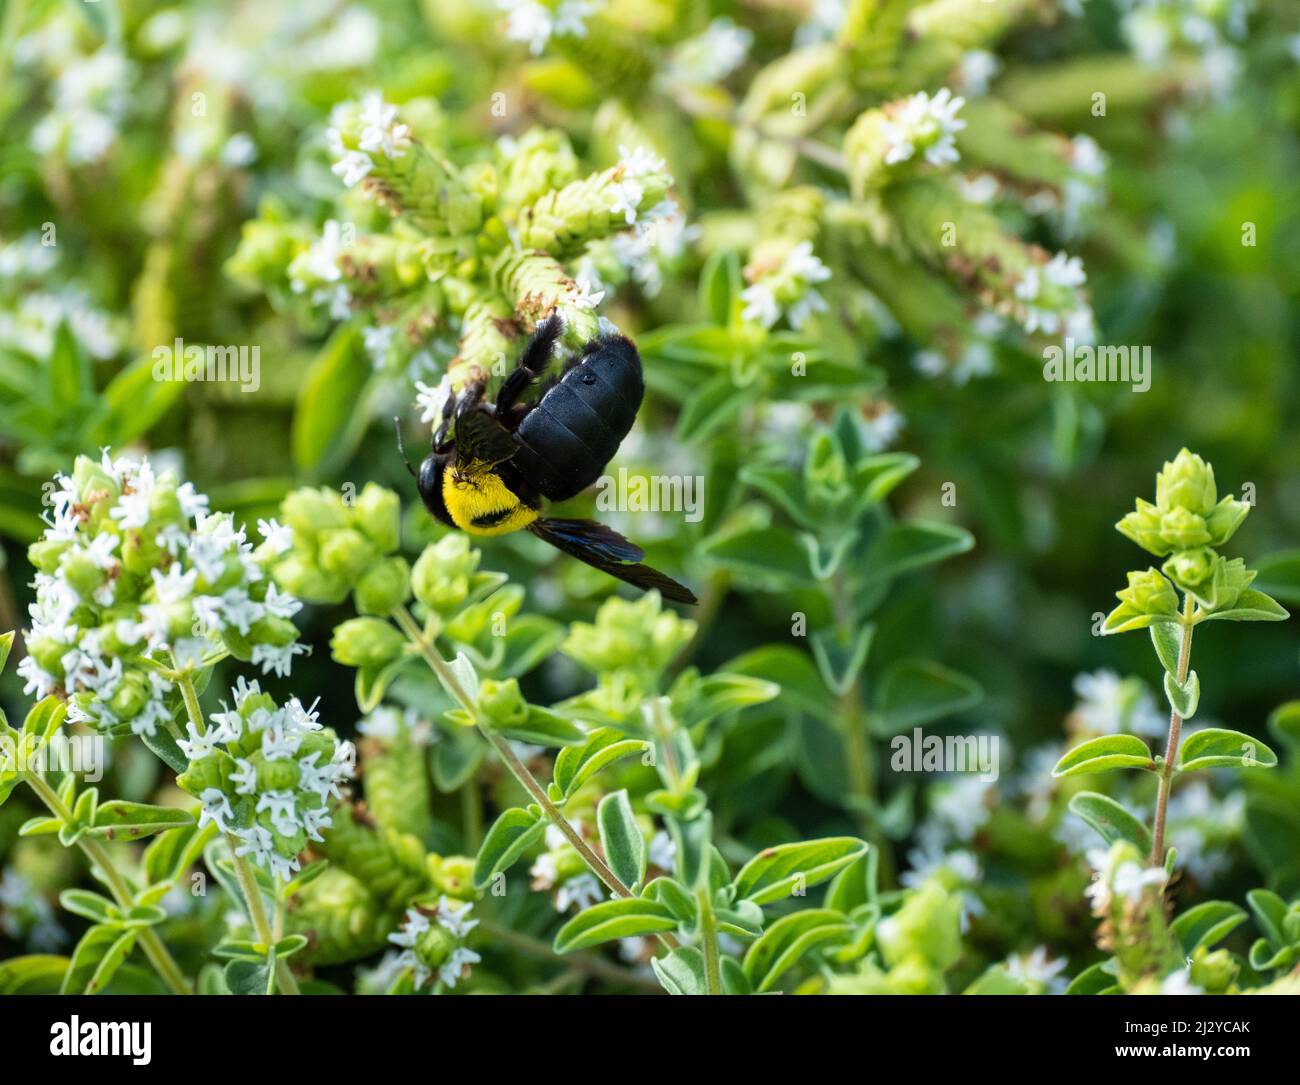 Carpenter Bee (Xylocopa violacea)  in The Canary Islands, Spain. Stock Photo